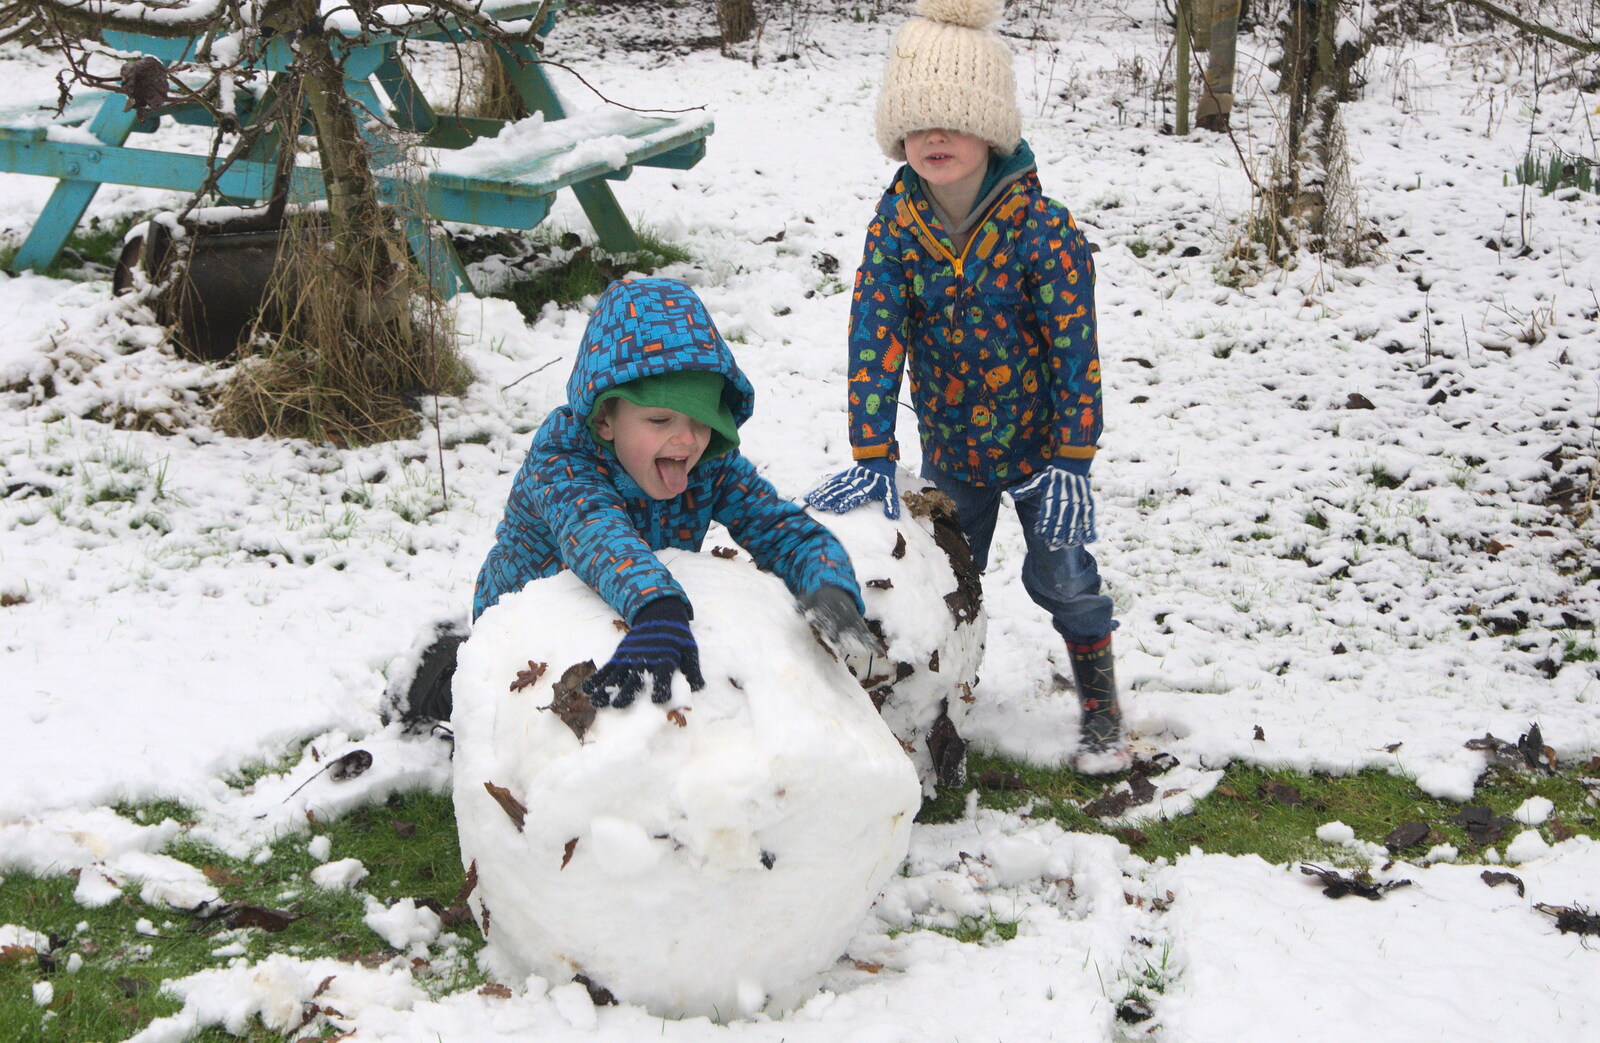 The boys have quite a big ball of snow from A Snowy Day, Brome, Suffolk - 12th February 2017